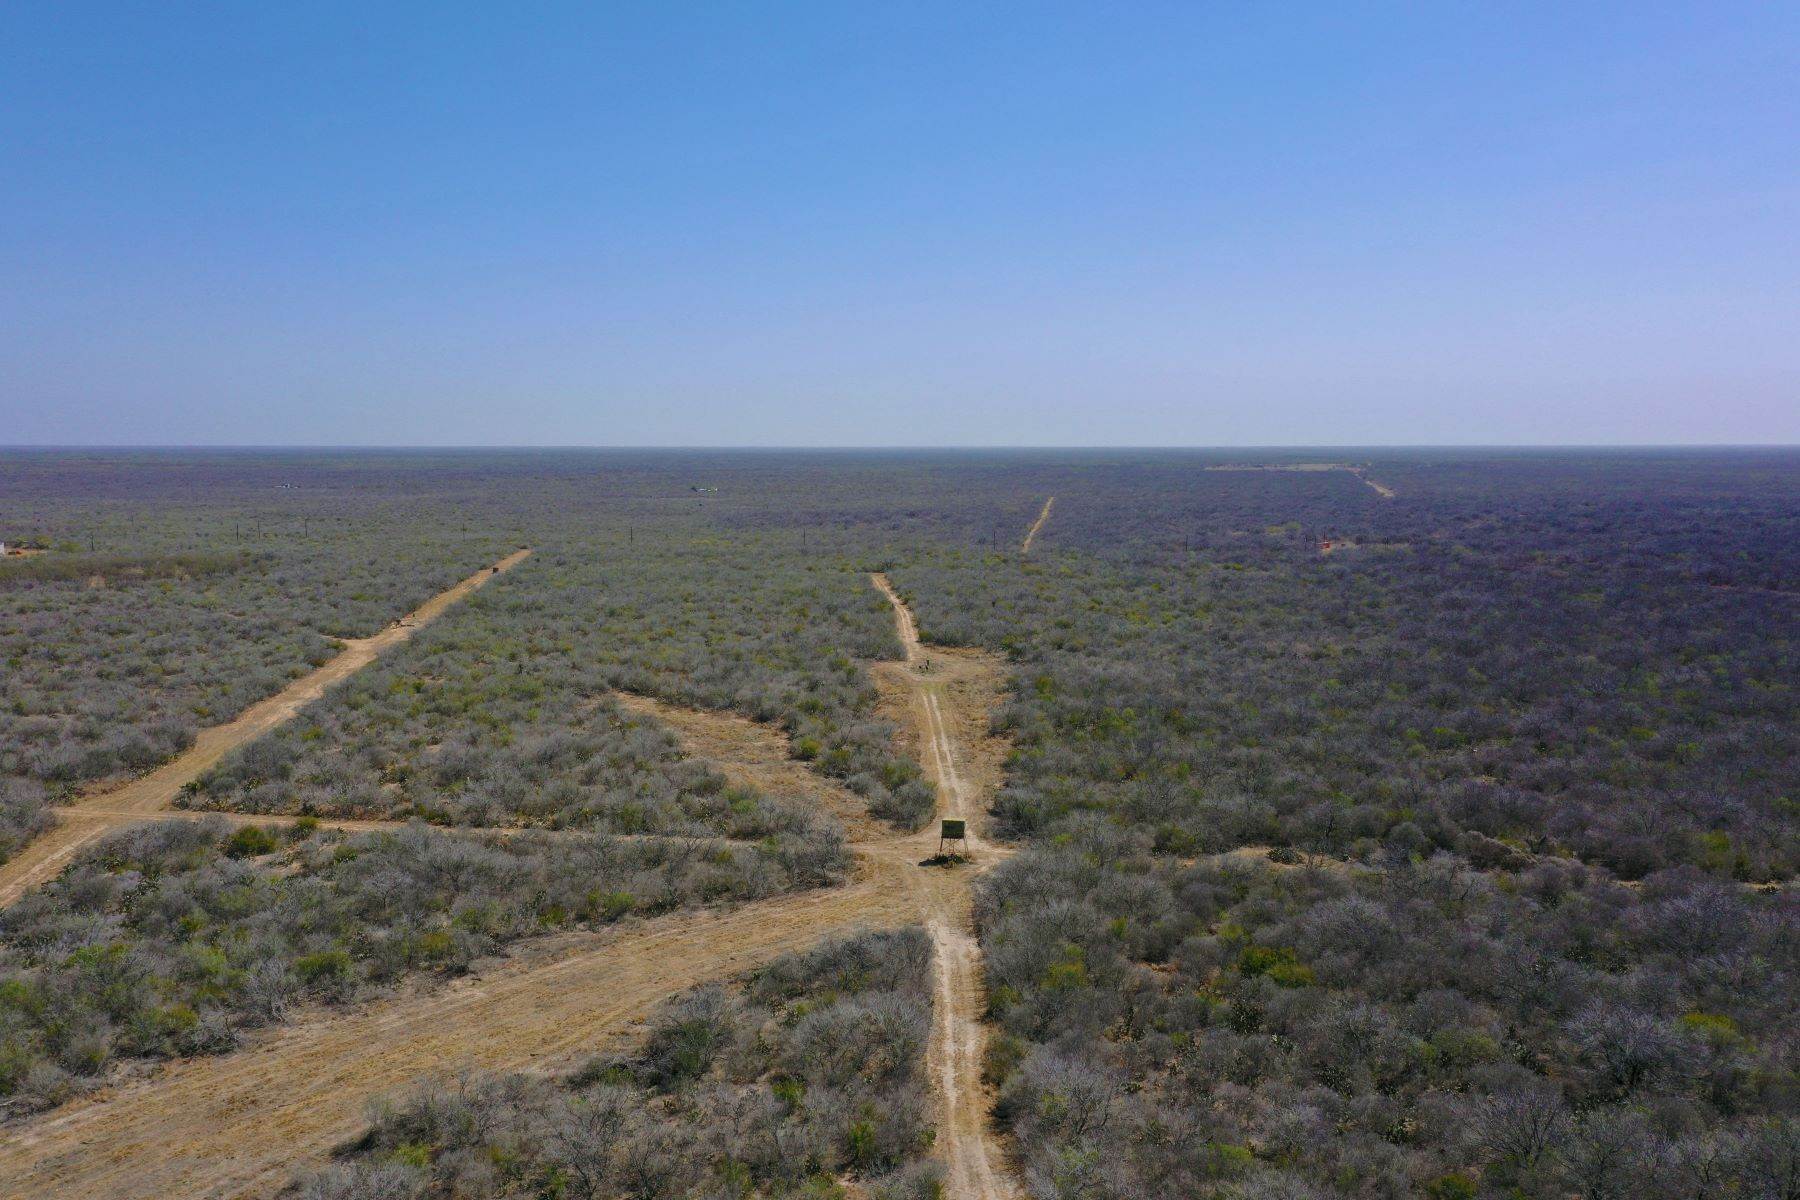 Farm and Ranch Properties for Sale at 308+/- Acres Papalote Viejo Ranch, Duval County , Benavides, TX 78341 308+/- Acres Papalote Viejo Ranch, Duval County Benavides, Texas 78341 United States